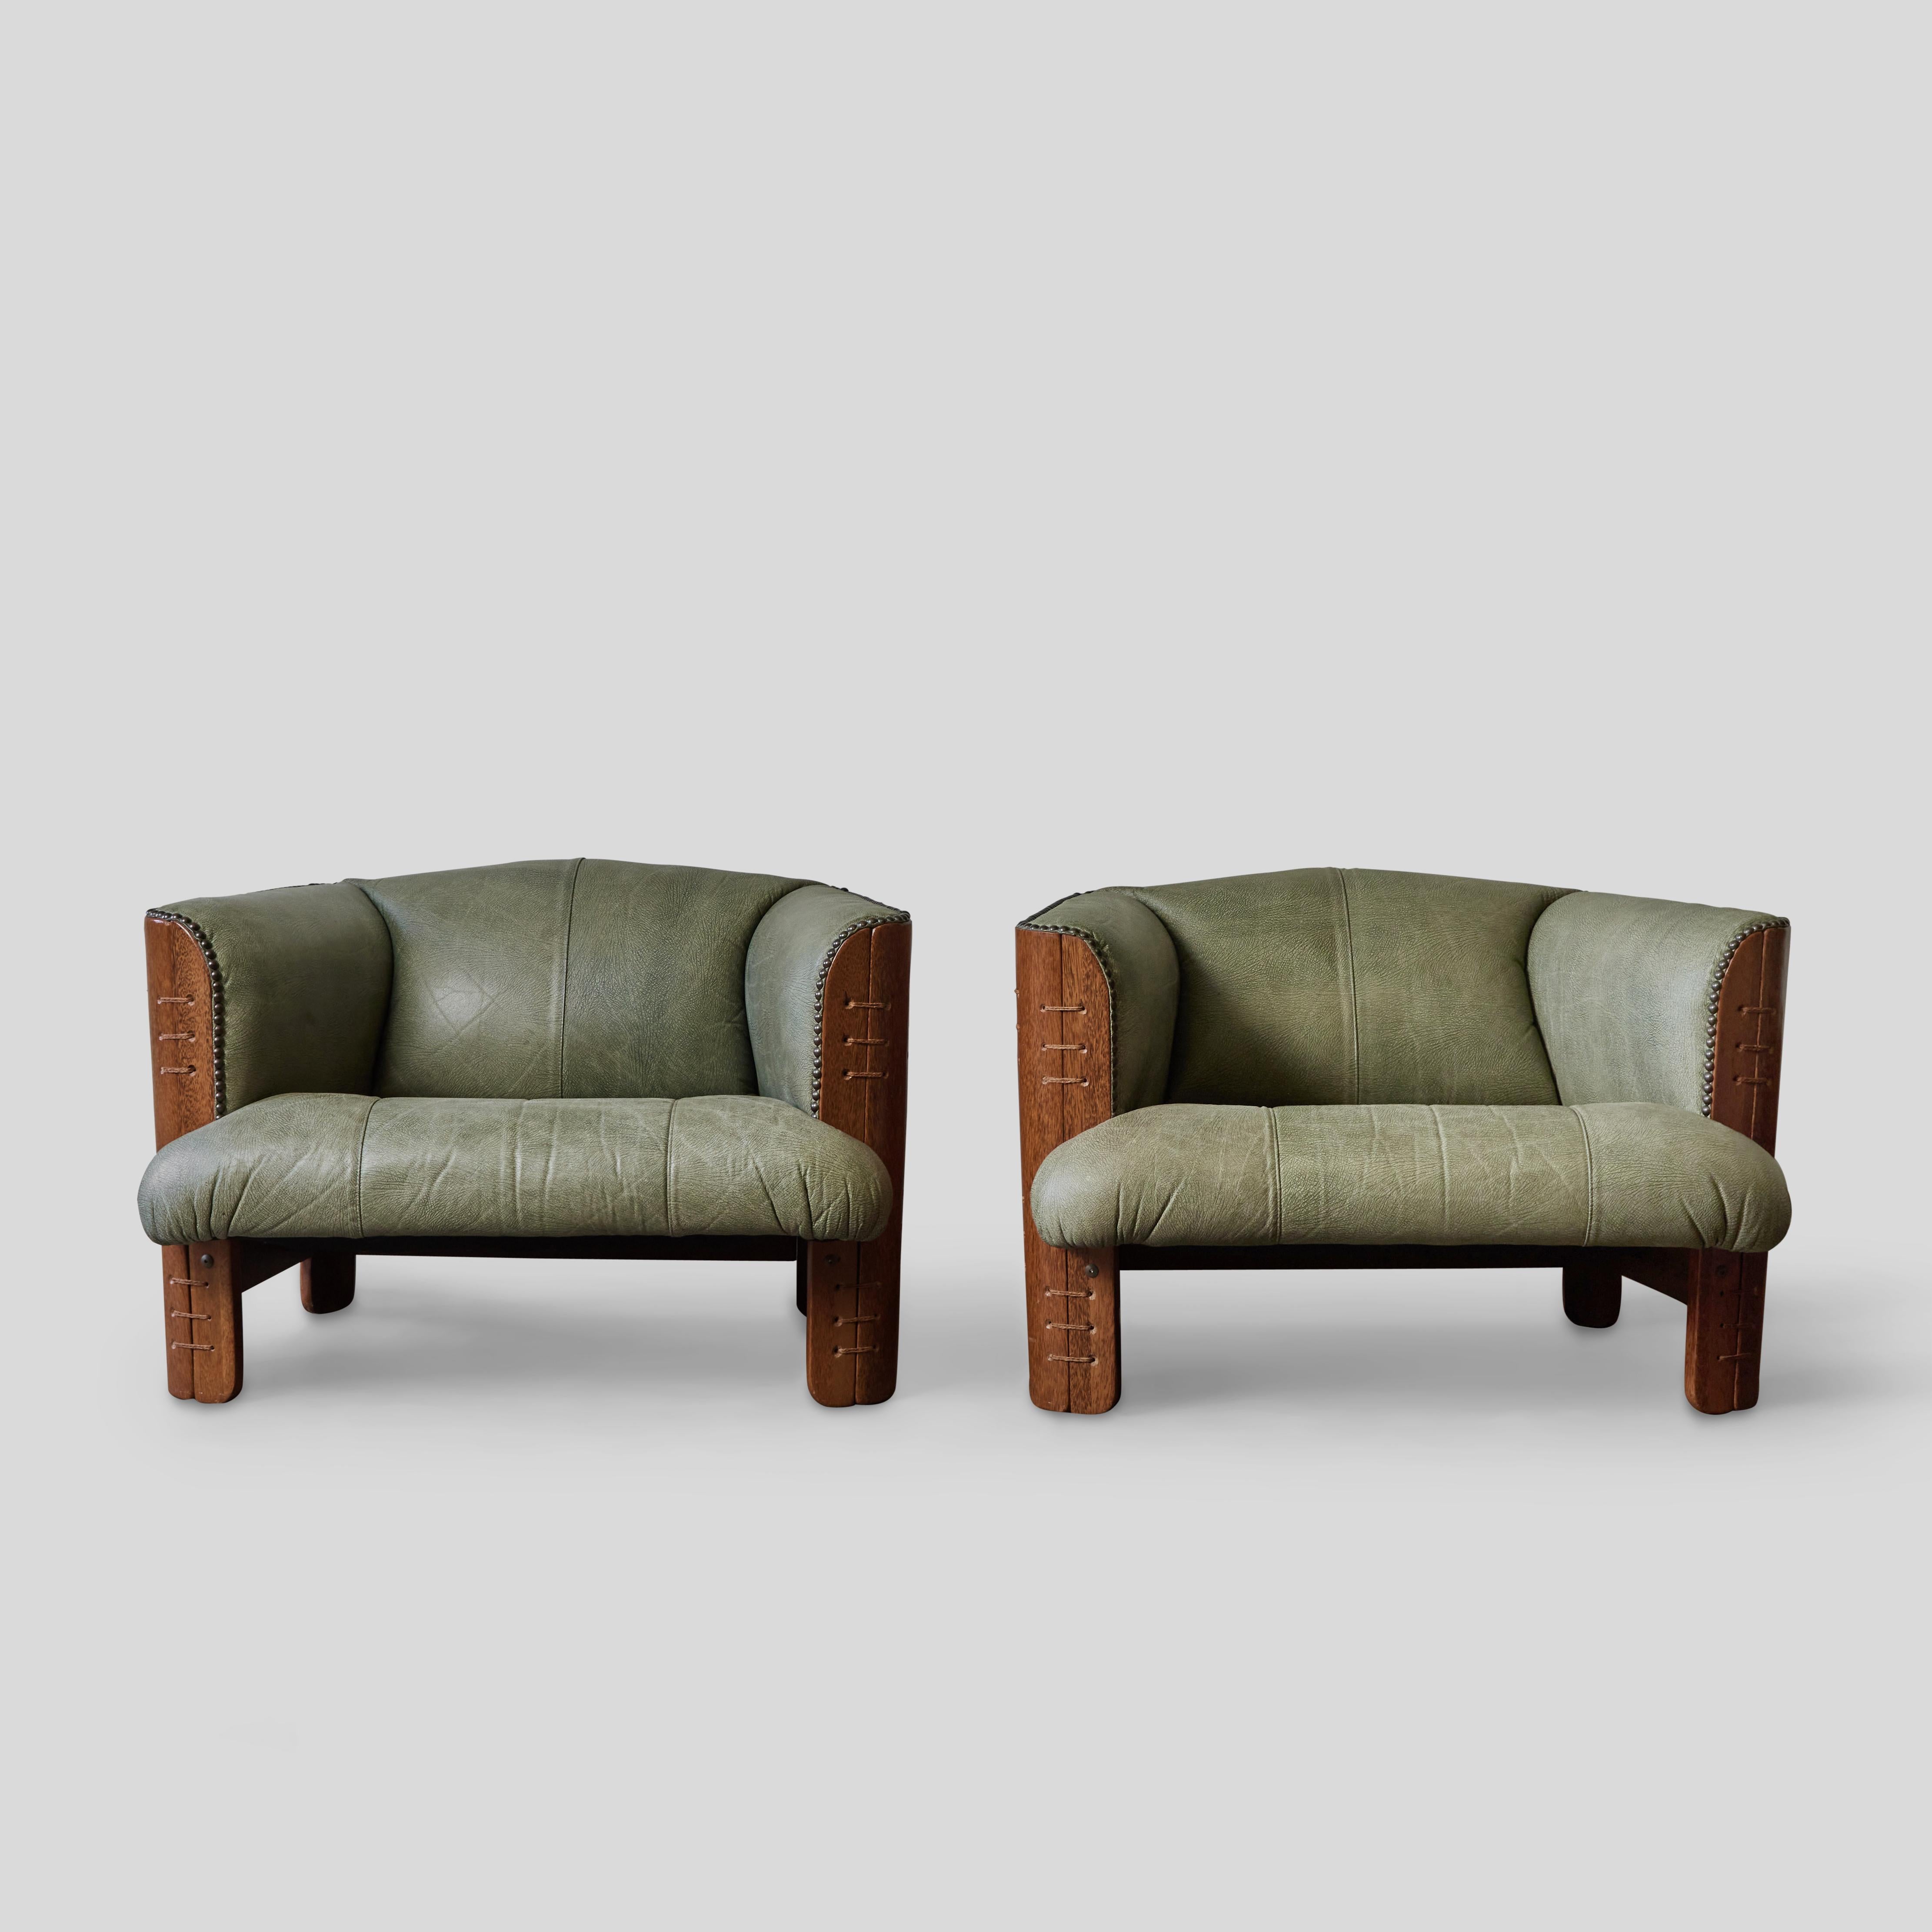 Pair of Mid-Century Palmwood Chairs with Original Green Leather Upholstery 2